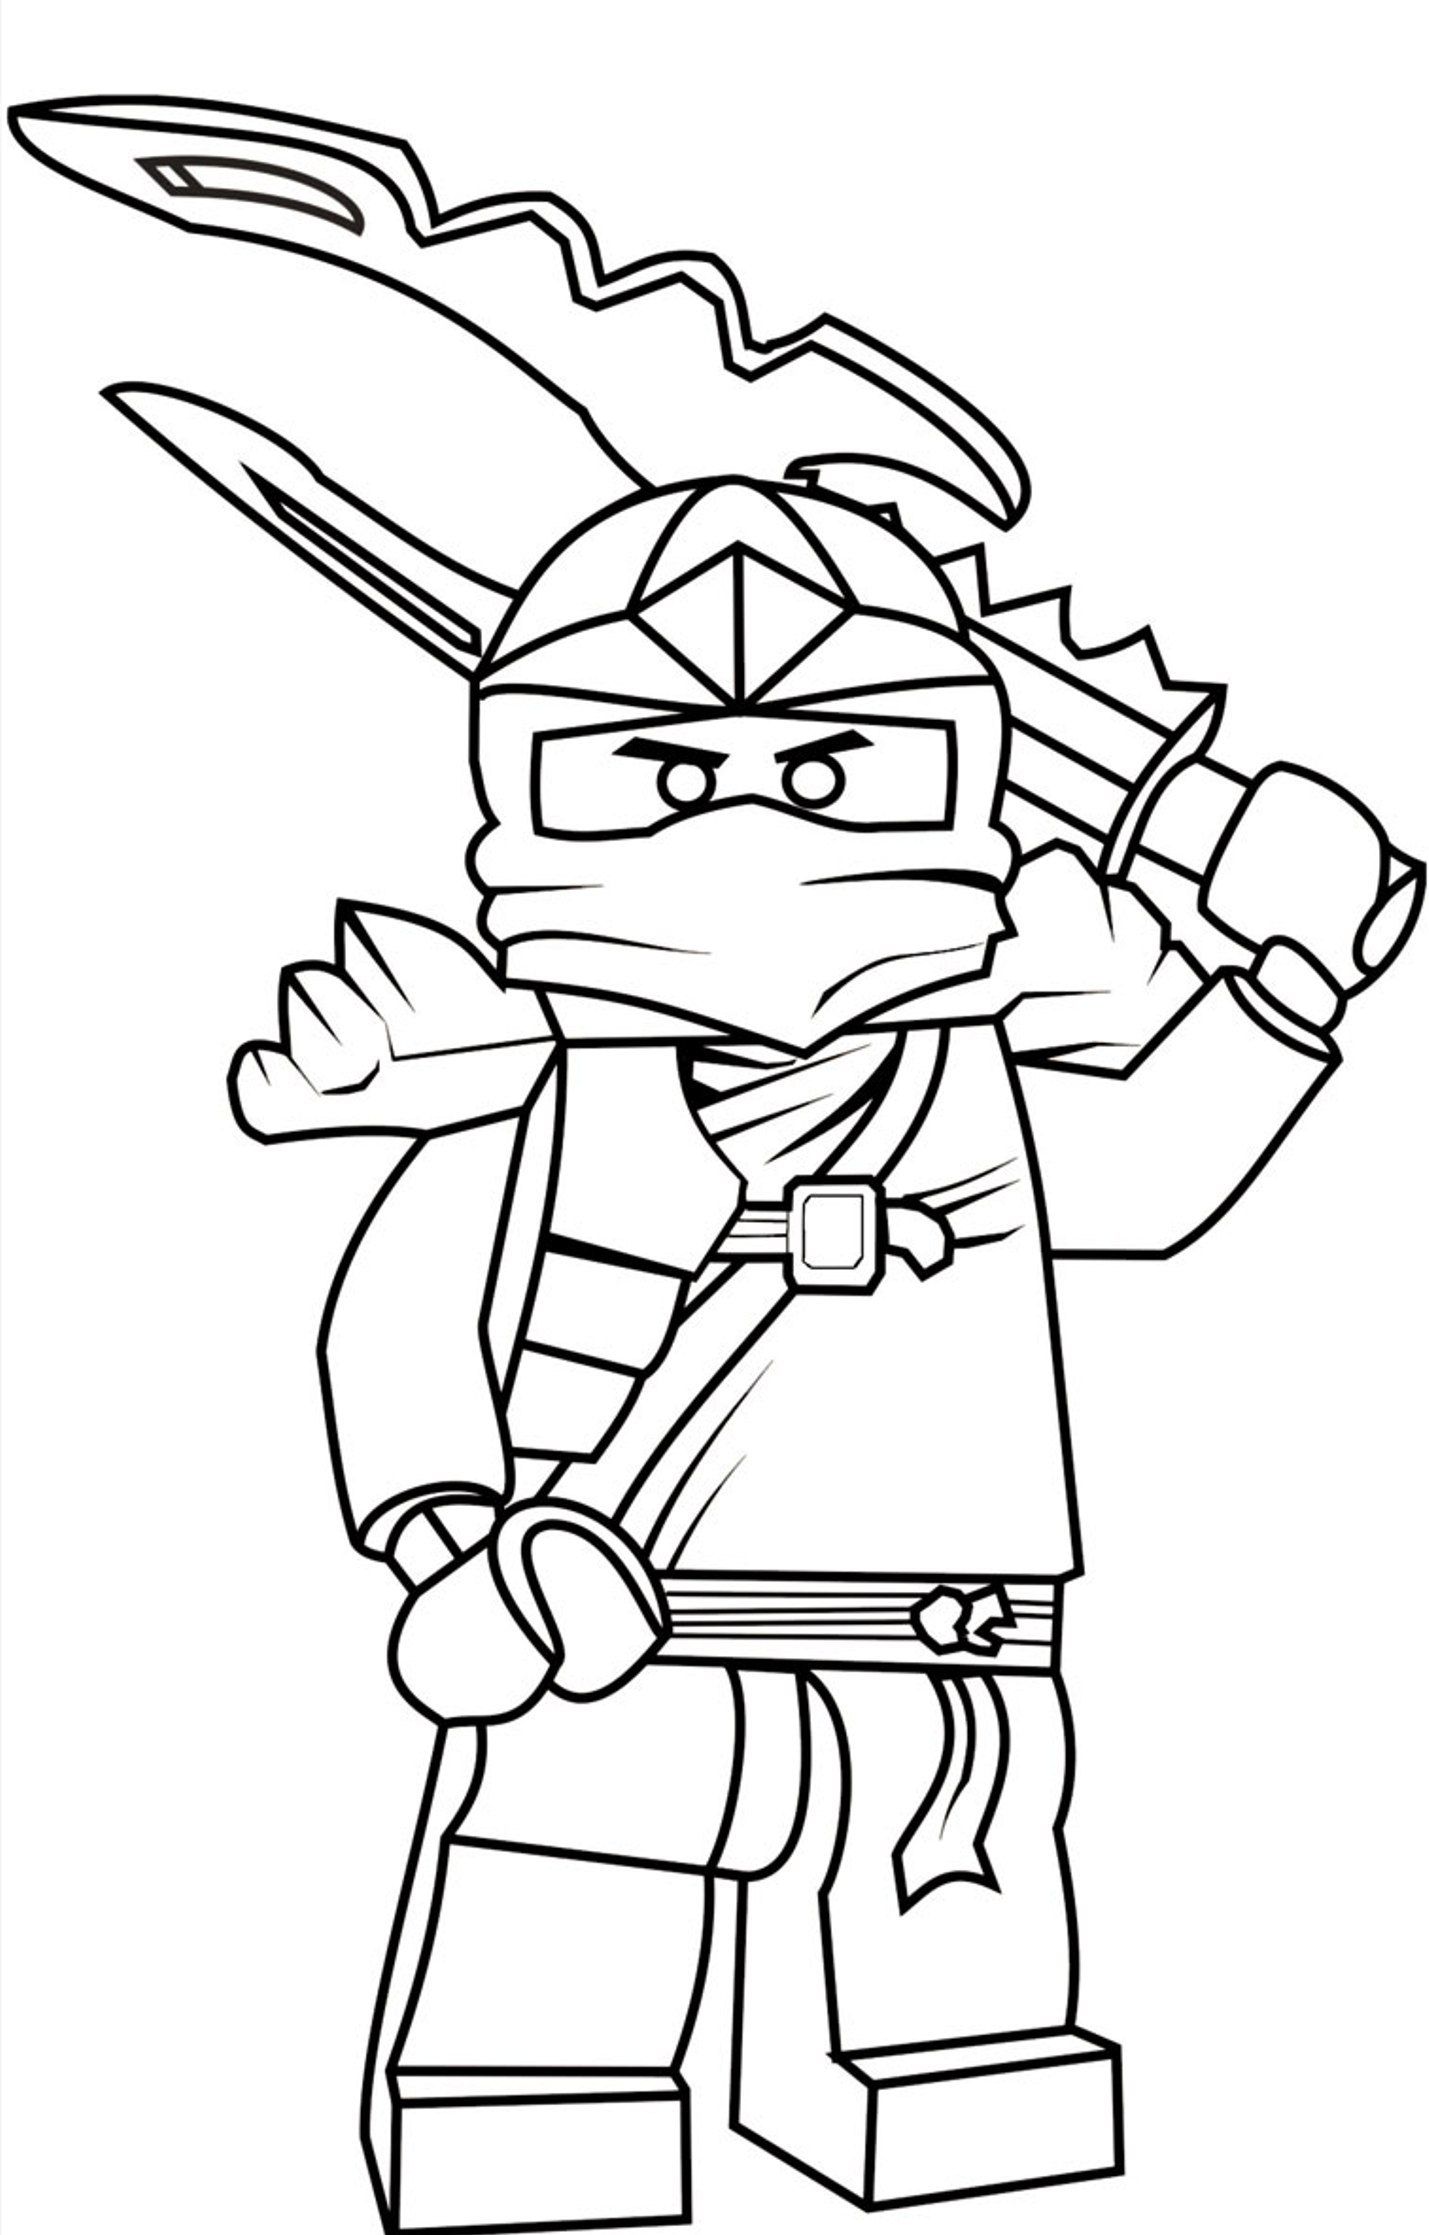 Cartoon Network Coloring Pages Download And Print For Free - Coloring Home